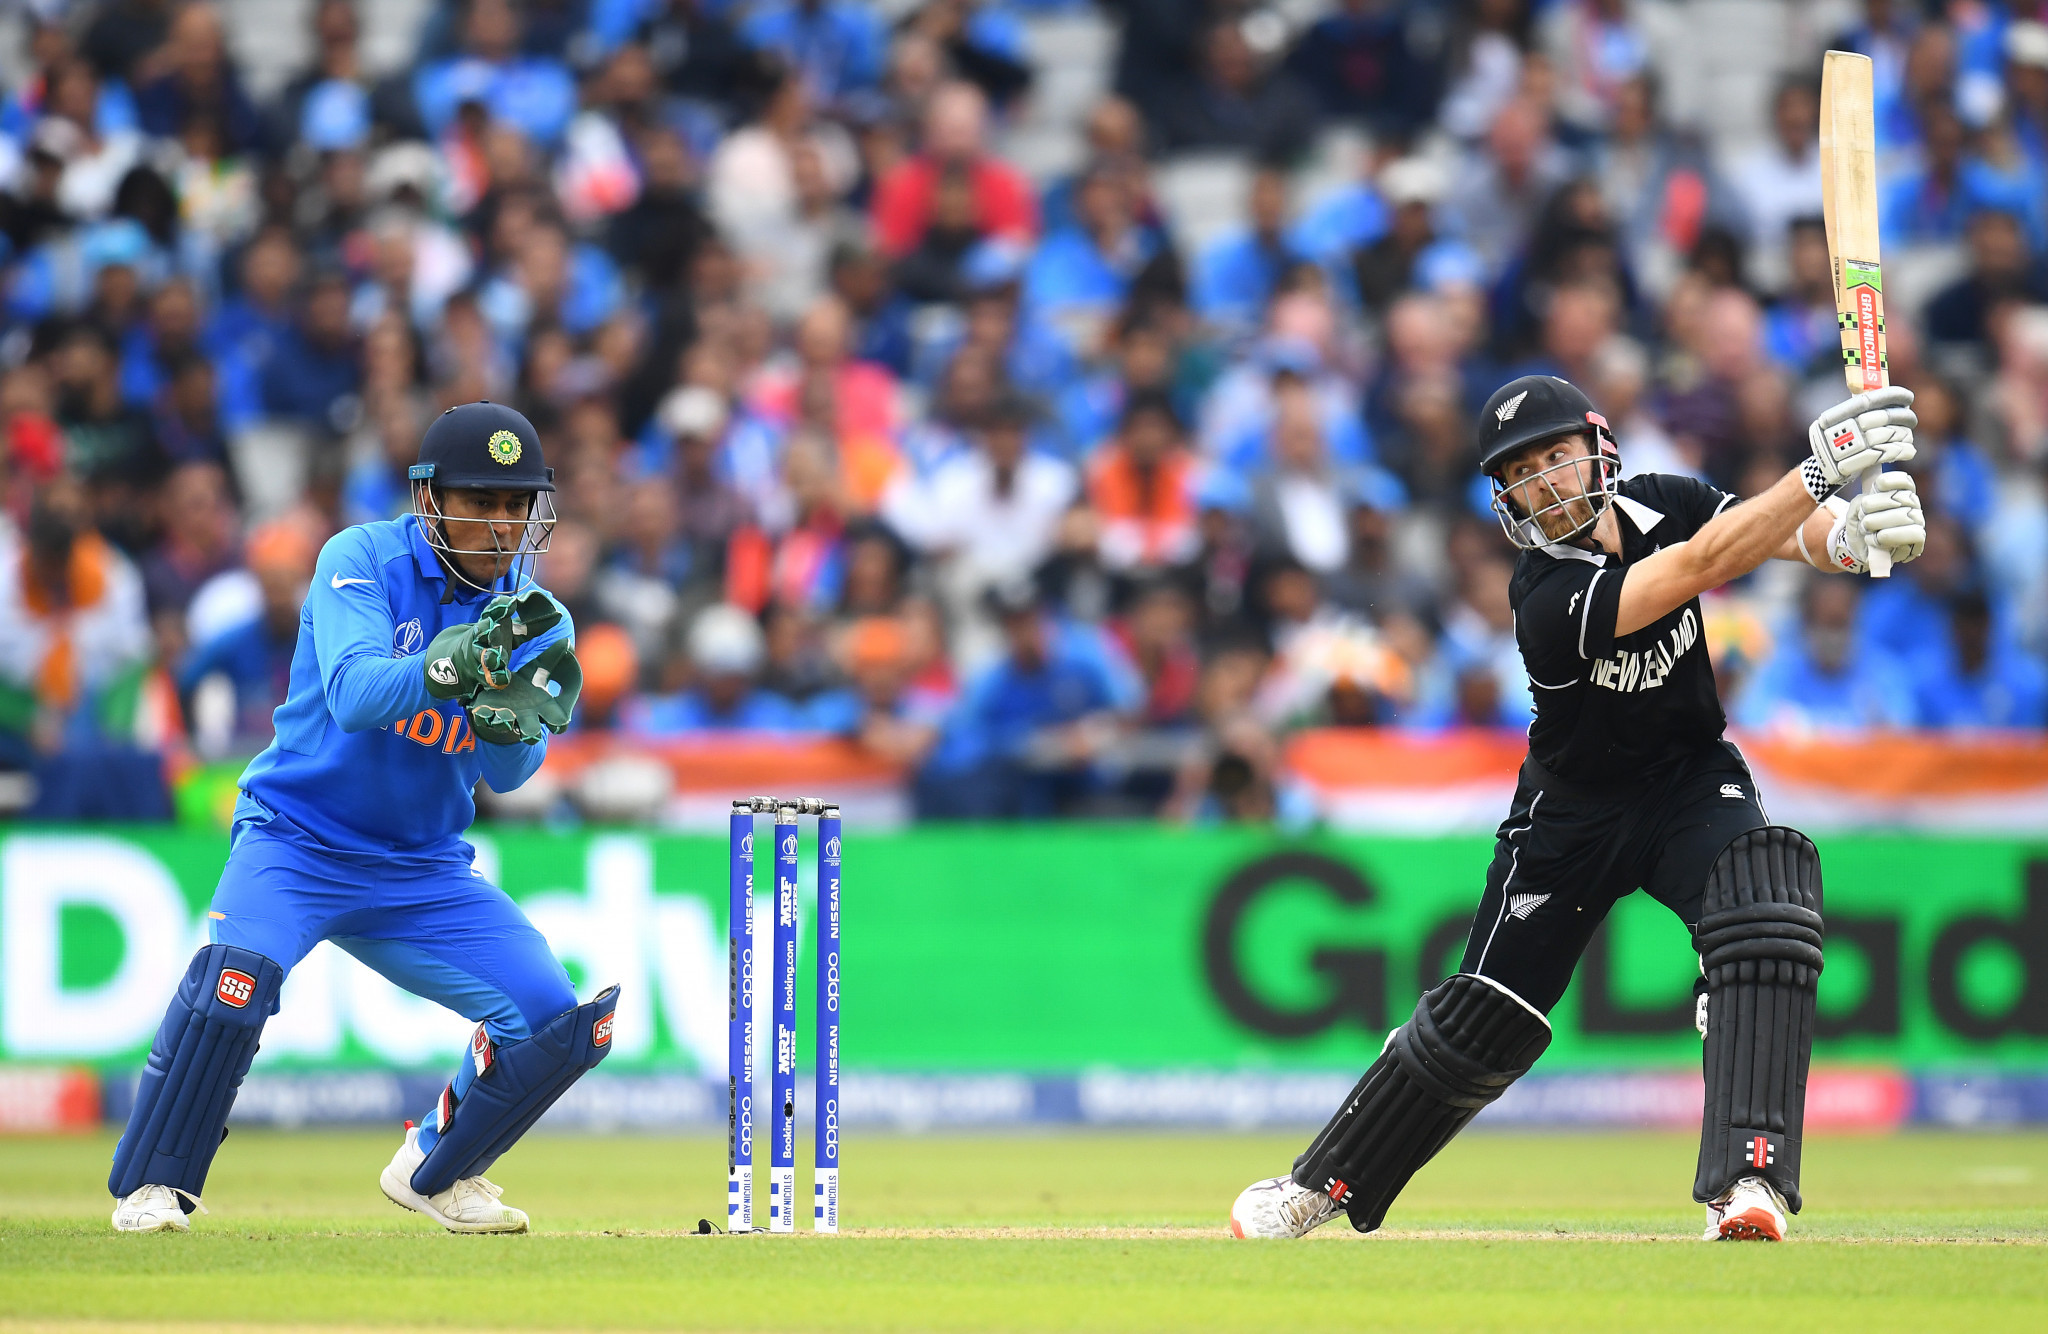 New Zealand's captain Kane Williamson scored 67 to help his side reach 211 for five wickets at Old Trafford in Manchester before rain forced play to be abandoned for the day ©Getty Images